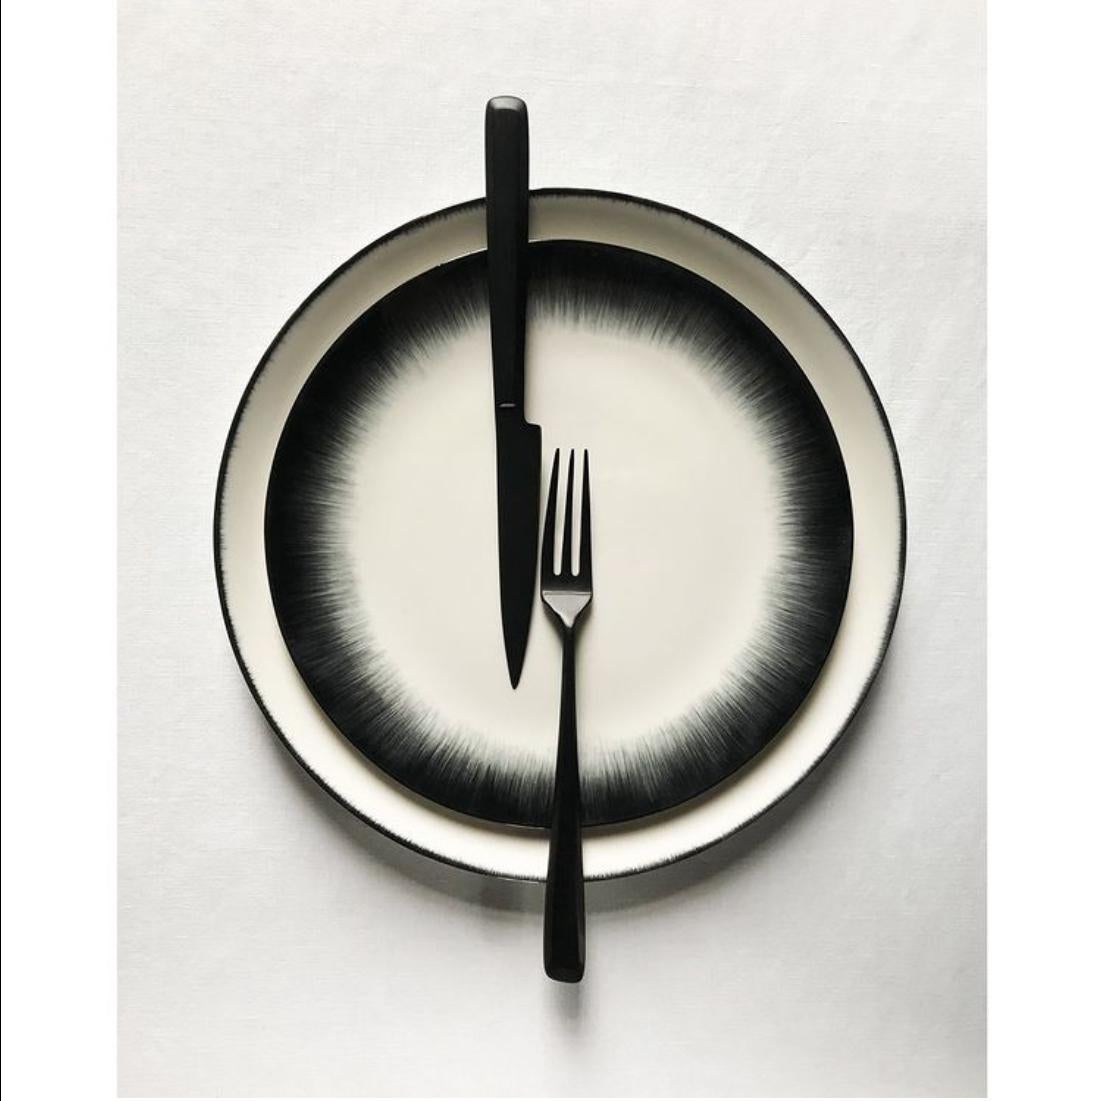 Ann Demeulemeester for Serax 17.5 plates (set of two) In New Condition For Sale In Laguna Beach, CA